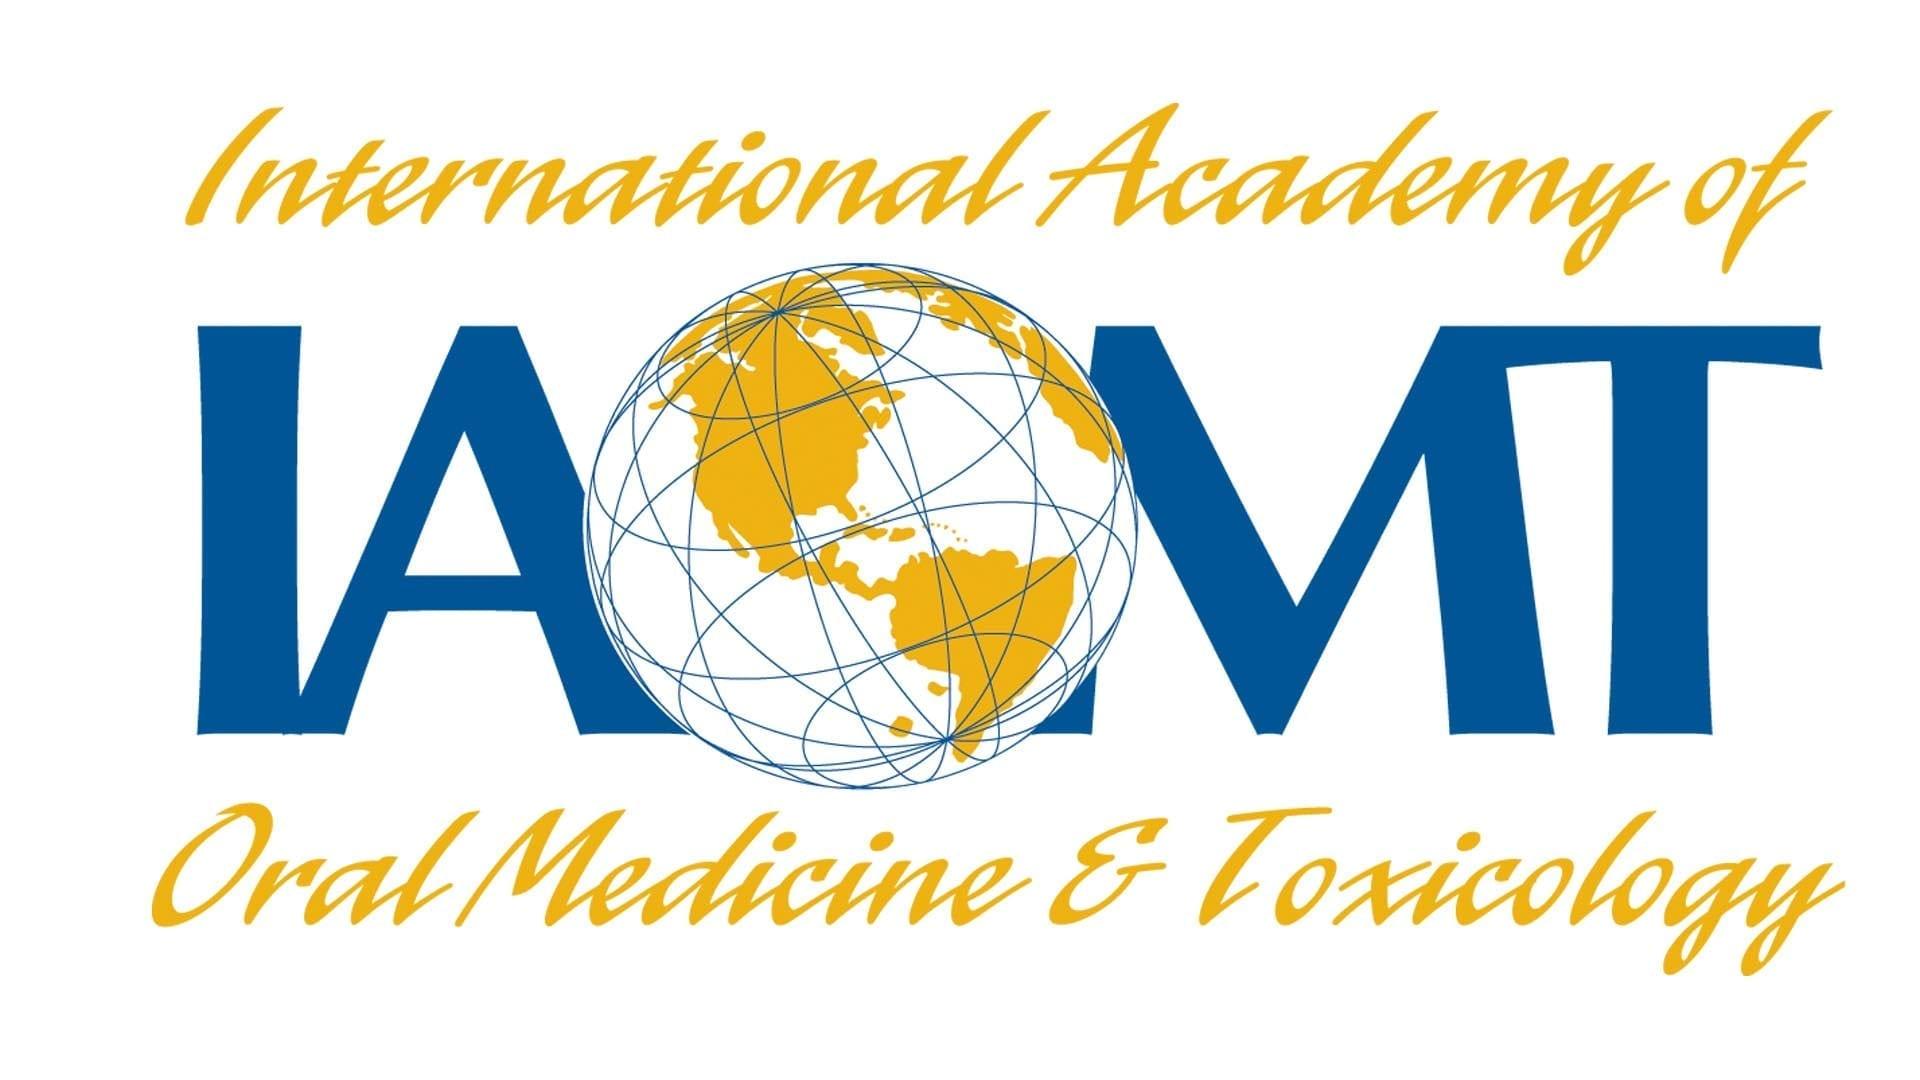 IAOMT Logo - The International Academy of Oral Medicine and Toxicology